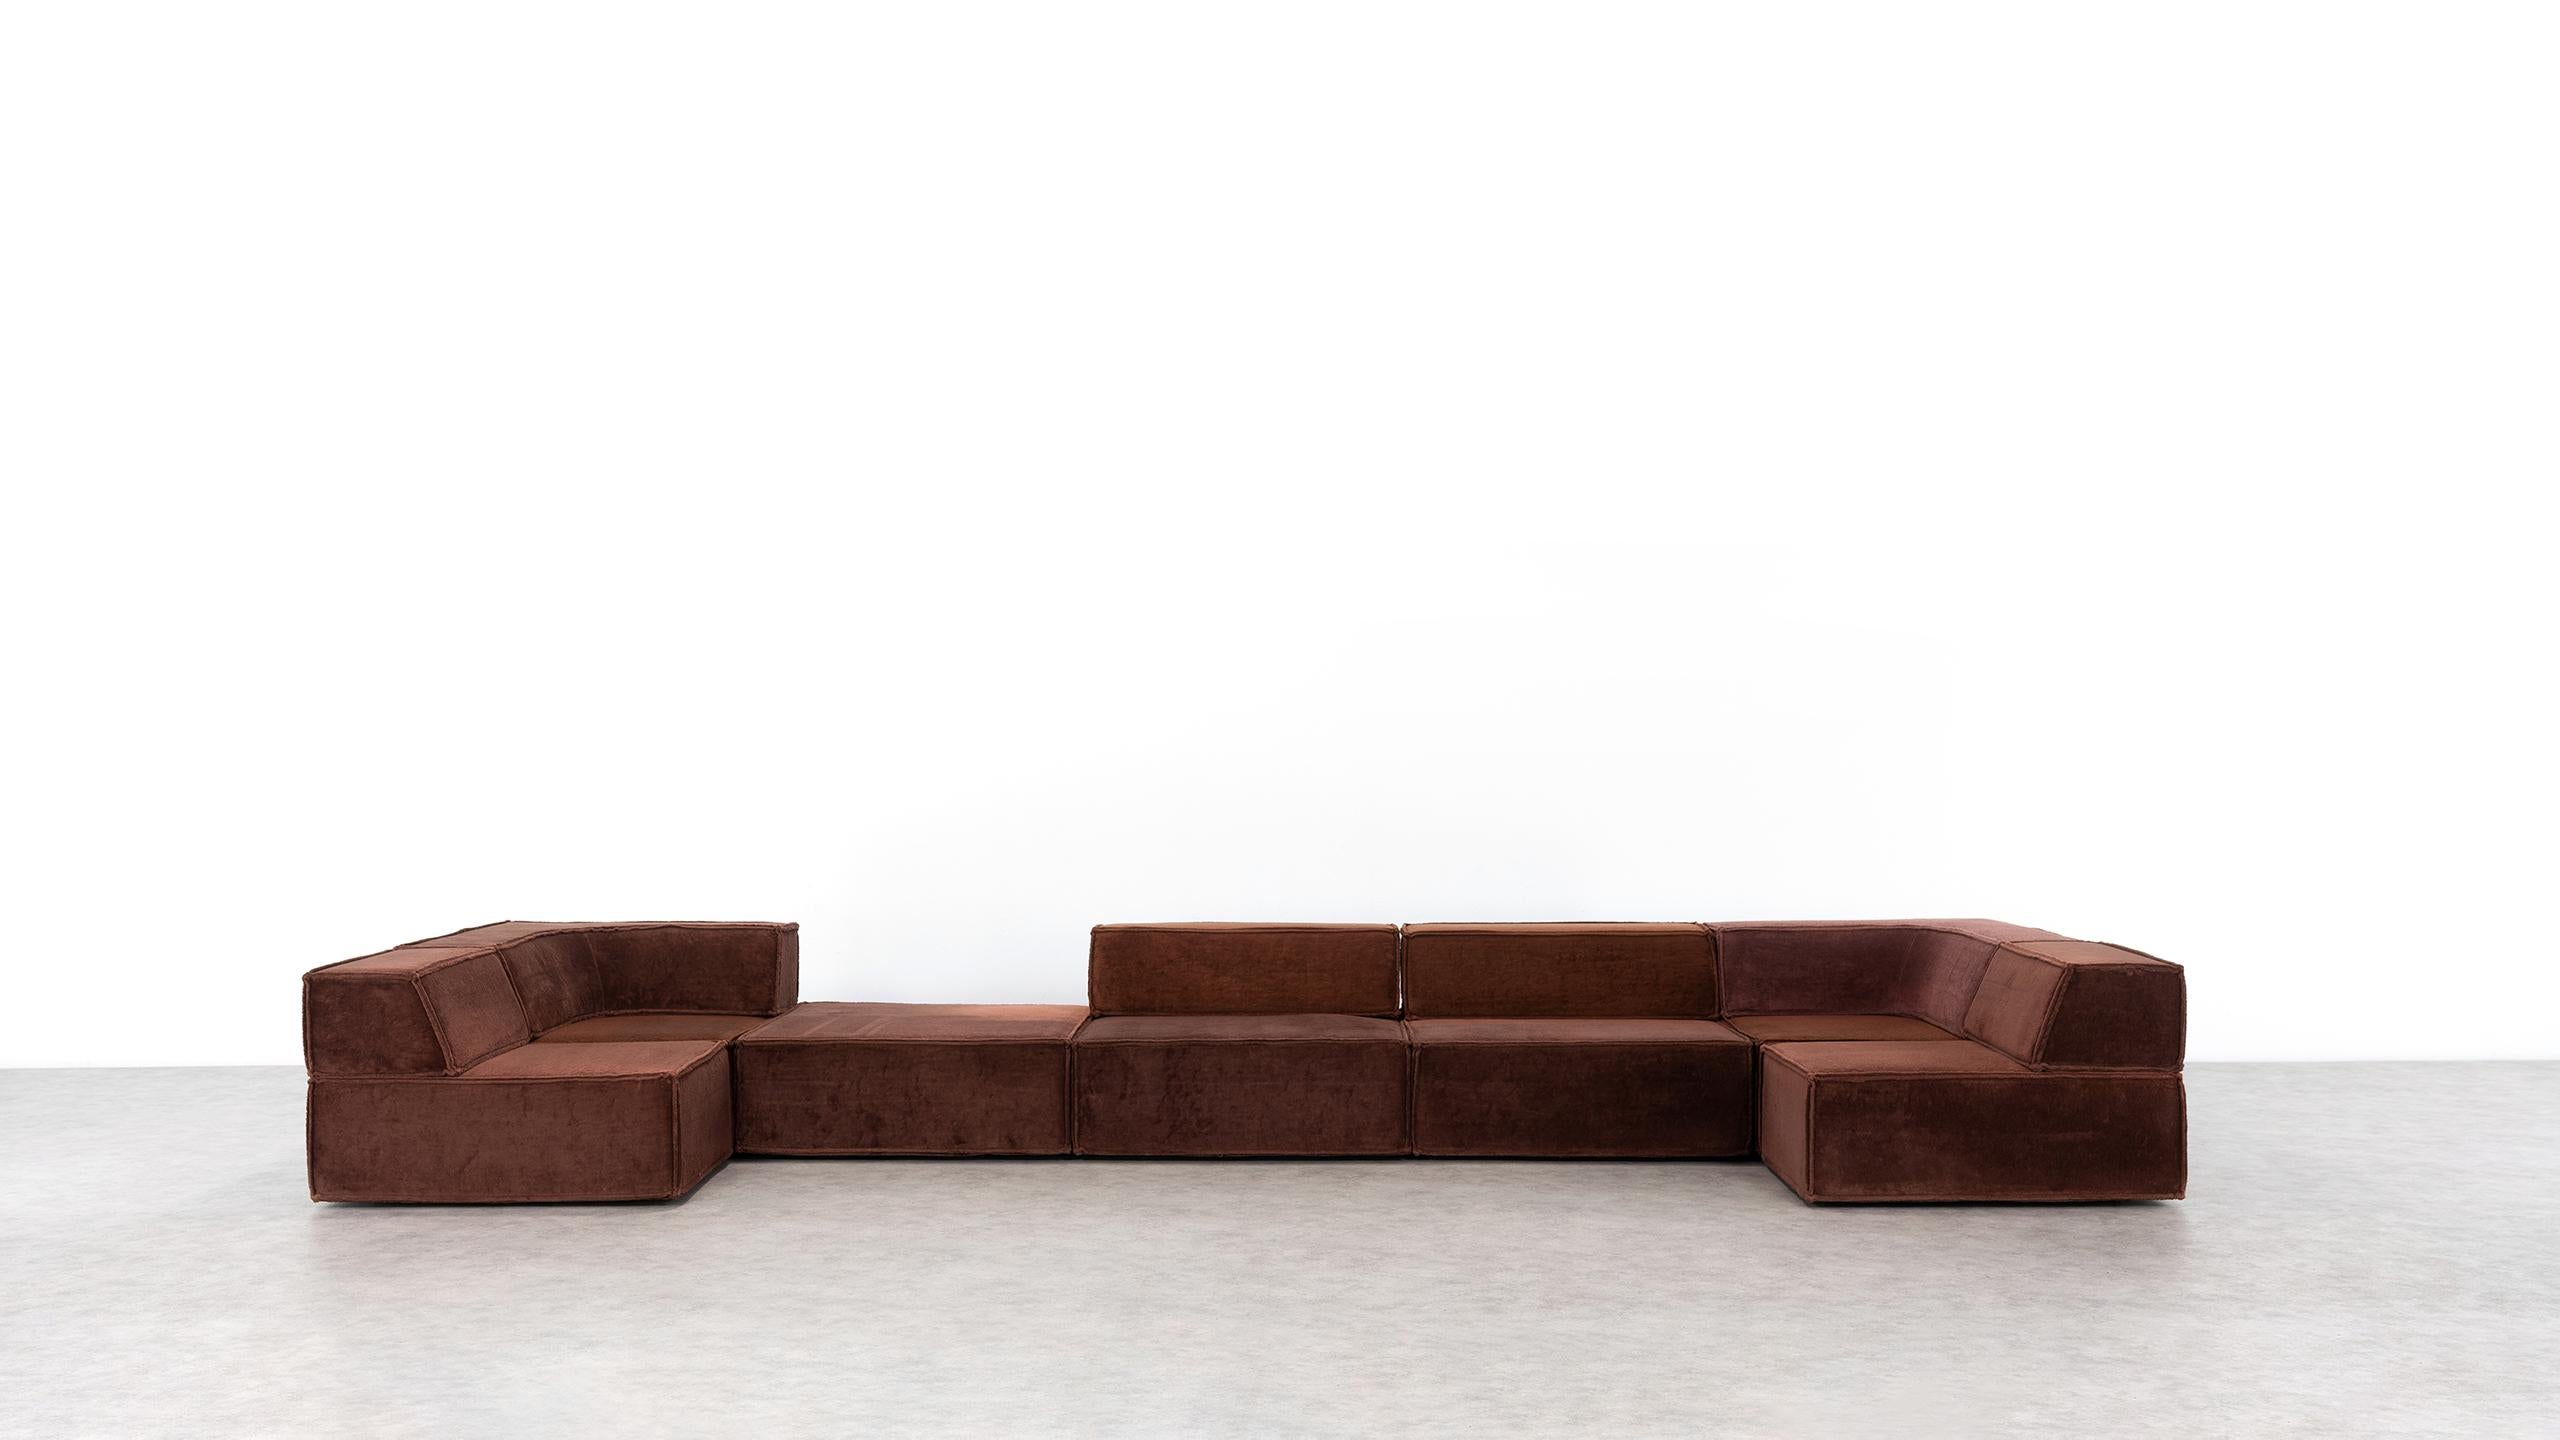 COR Trio Modular Sofa, Giant Landscape in Chocolate Brown, 1972 by Team Form AG 1